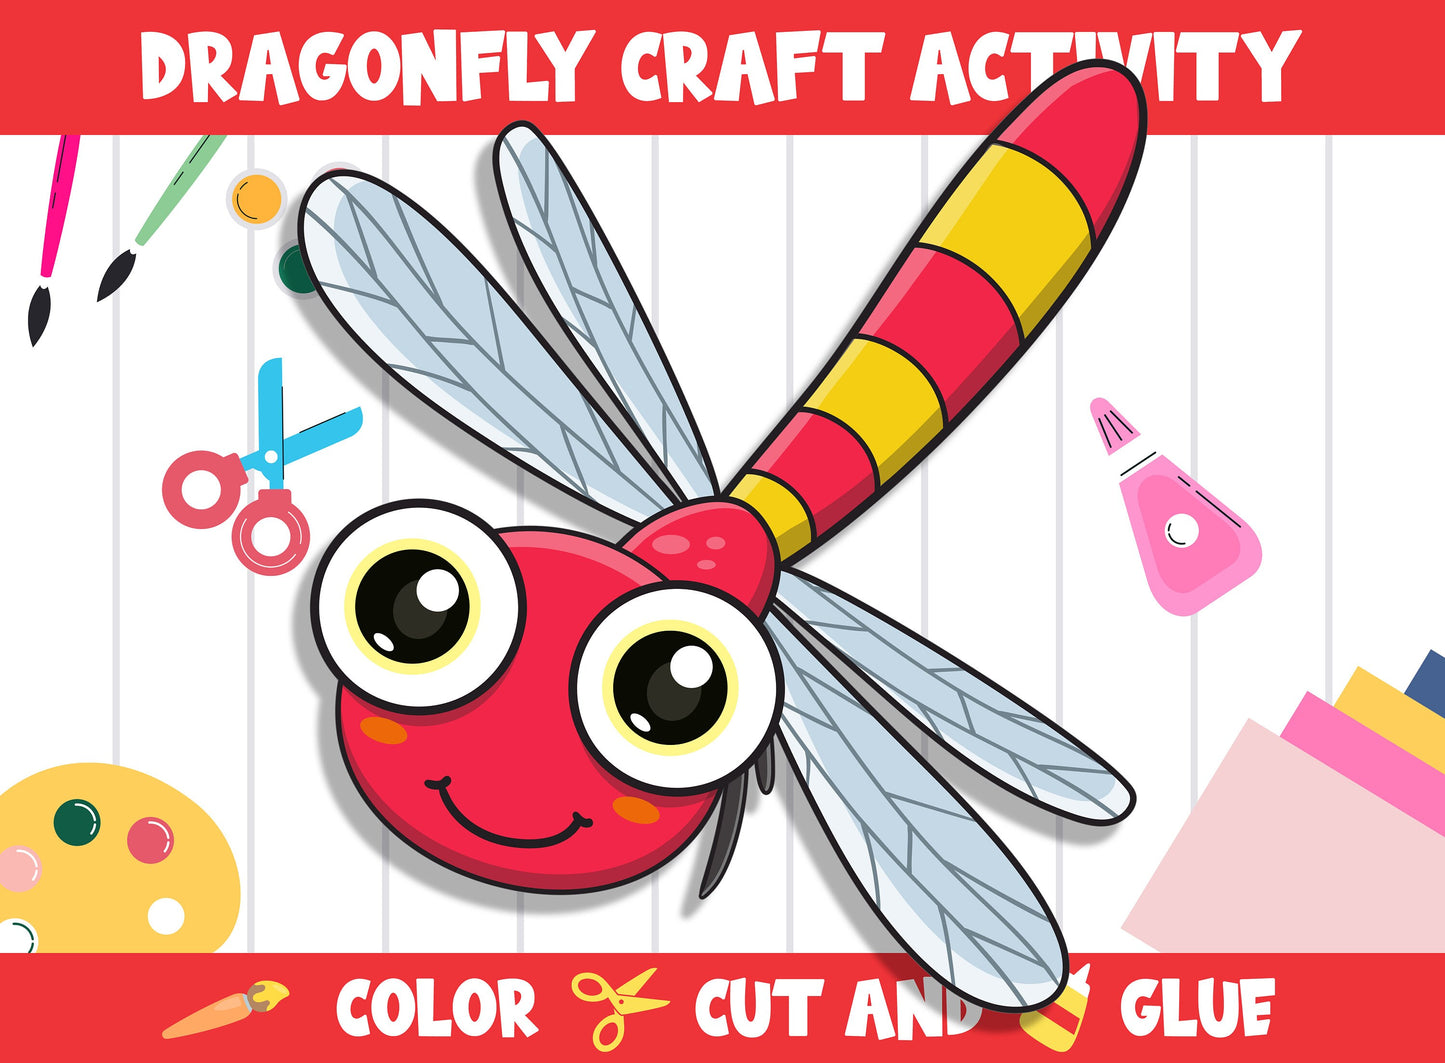 Cute Dragonfly Craft Activity - Color, Cut, and Glue for PreK to 2nd Grade, PDF File, Instant Download